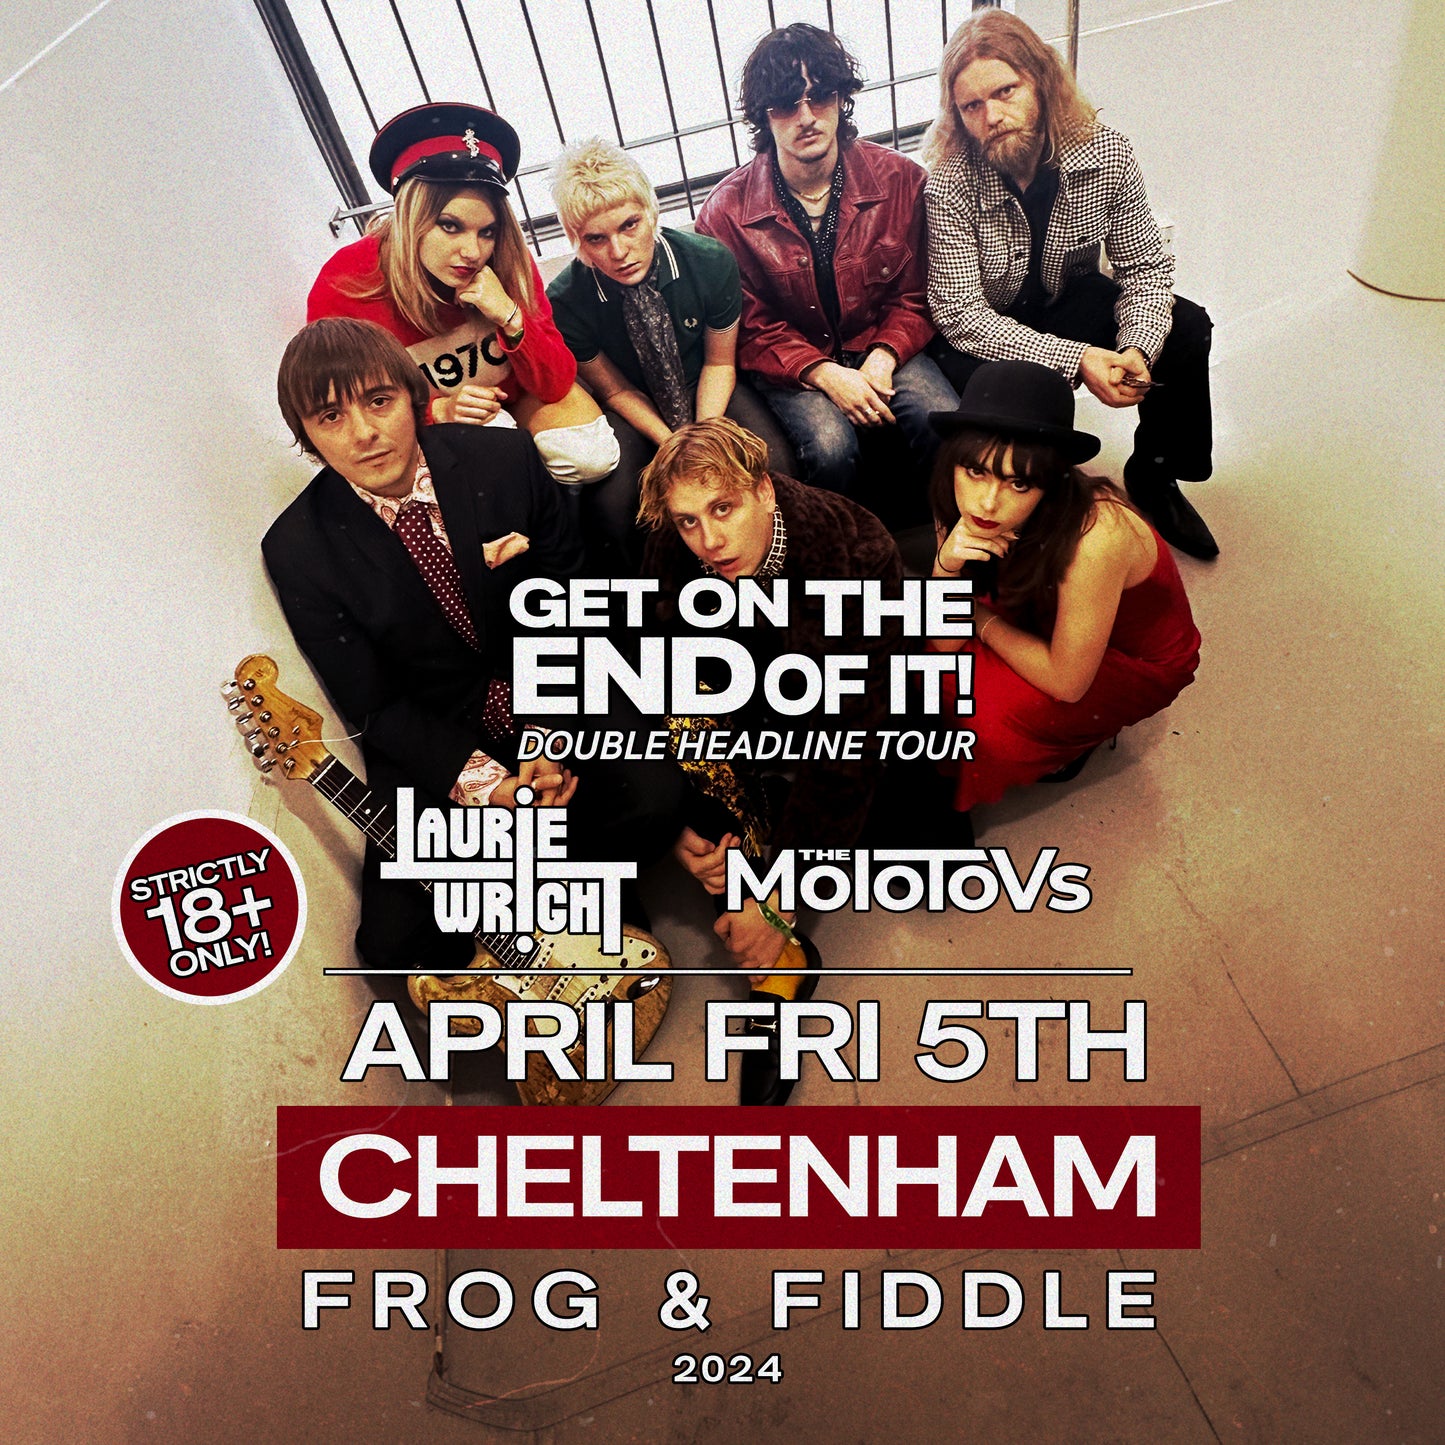 CHELTENHAM | FROG & FIDDLE | 05.04.24 | Get On The End Of It: Double Headline Tour